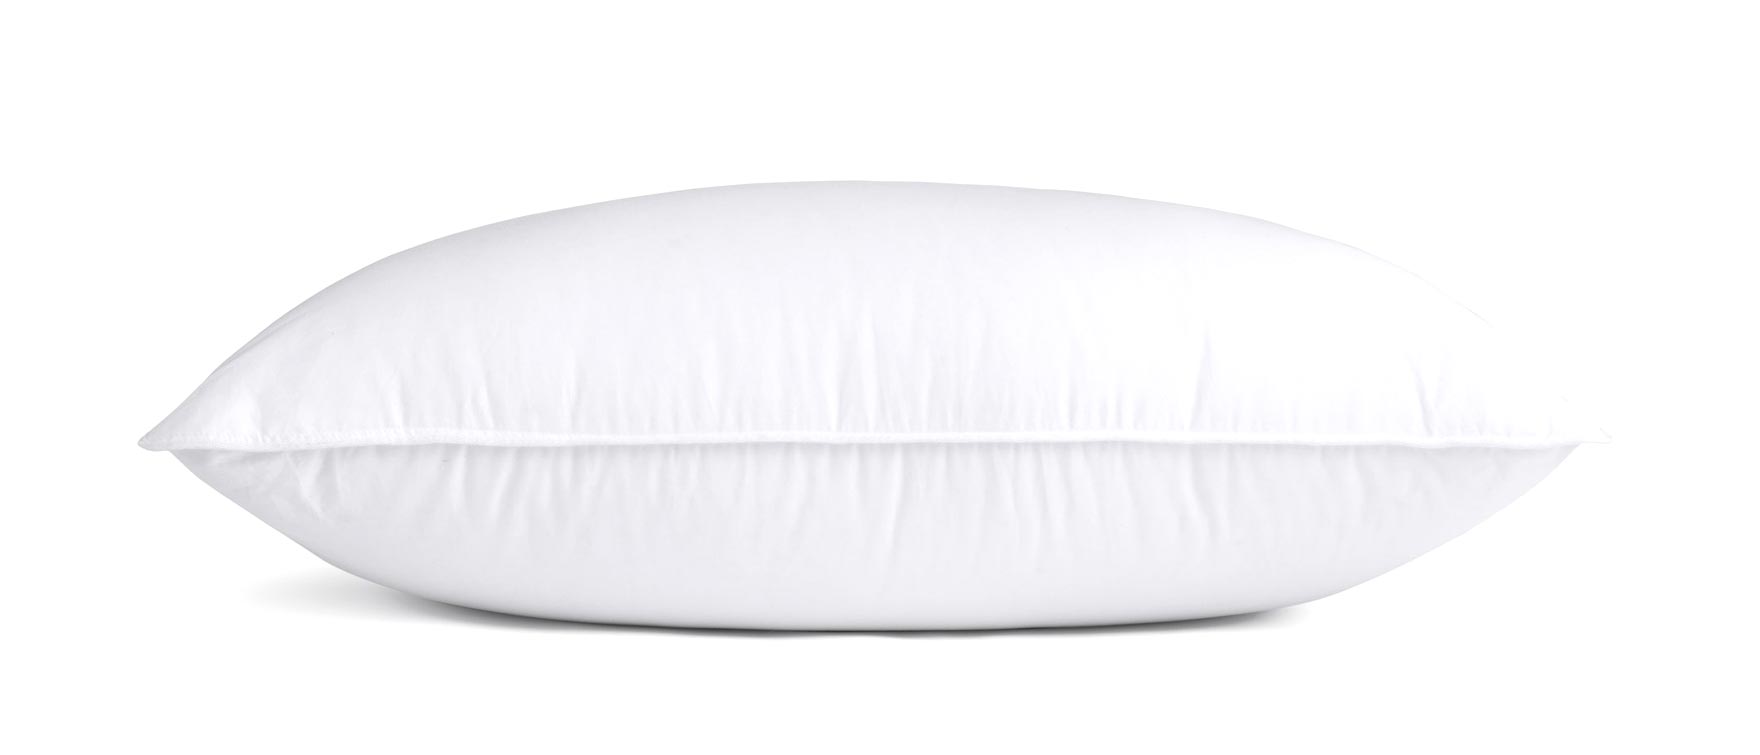 5. Best Down Pillow for Stomach Sleepers: Parachute Home Down Pillow